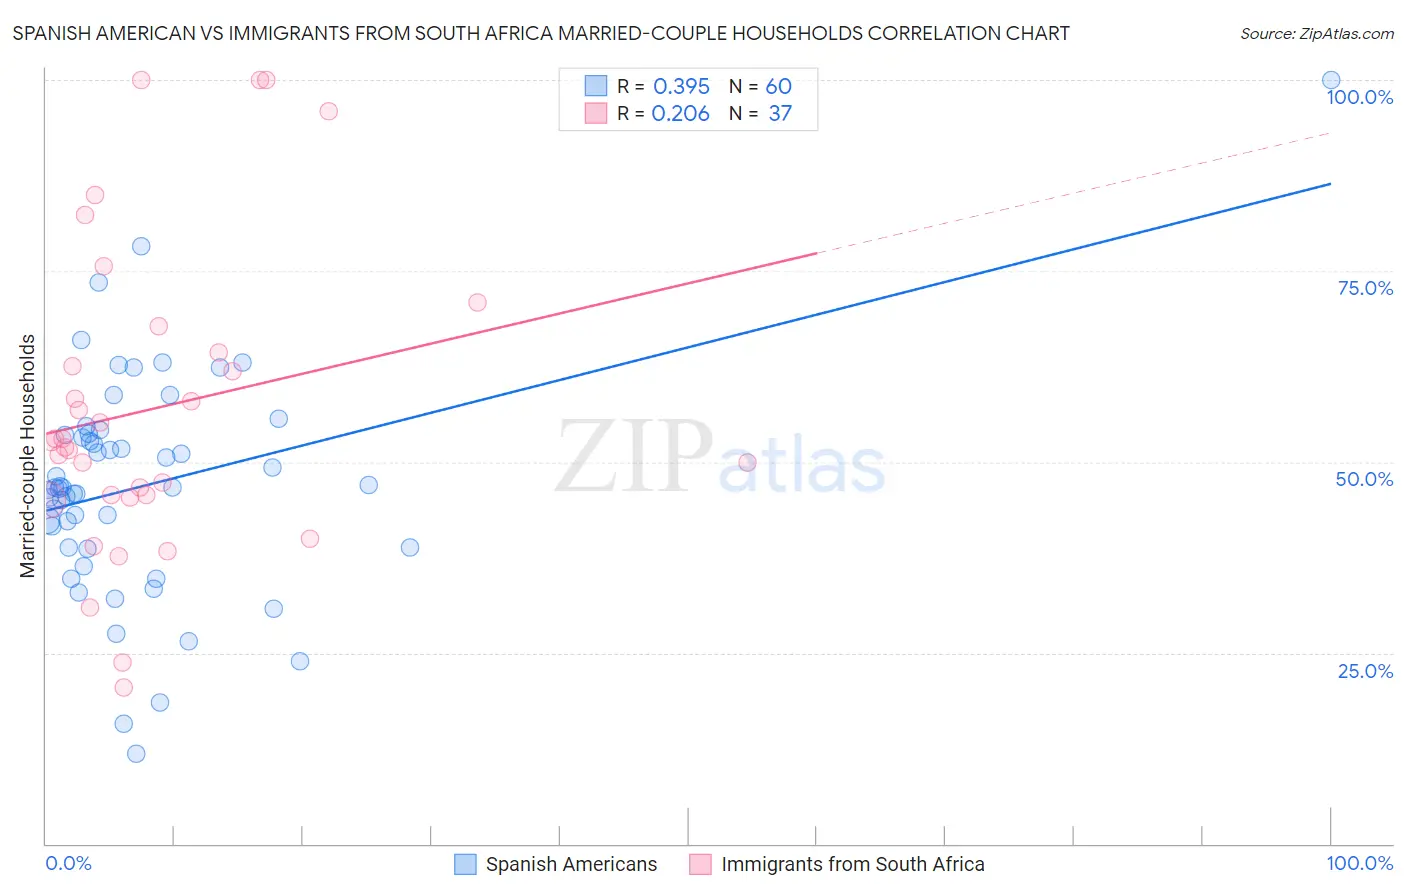 Spanish American vs Immigrants from South Africa Married-couple Households